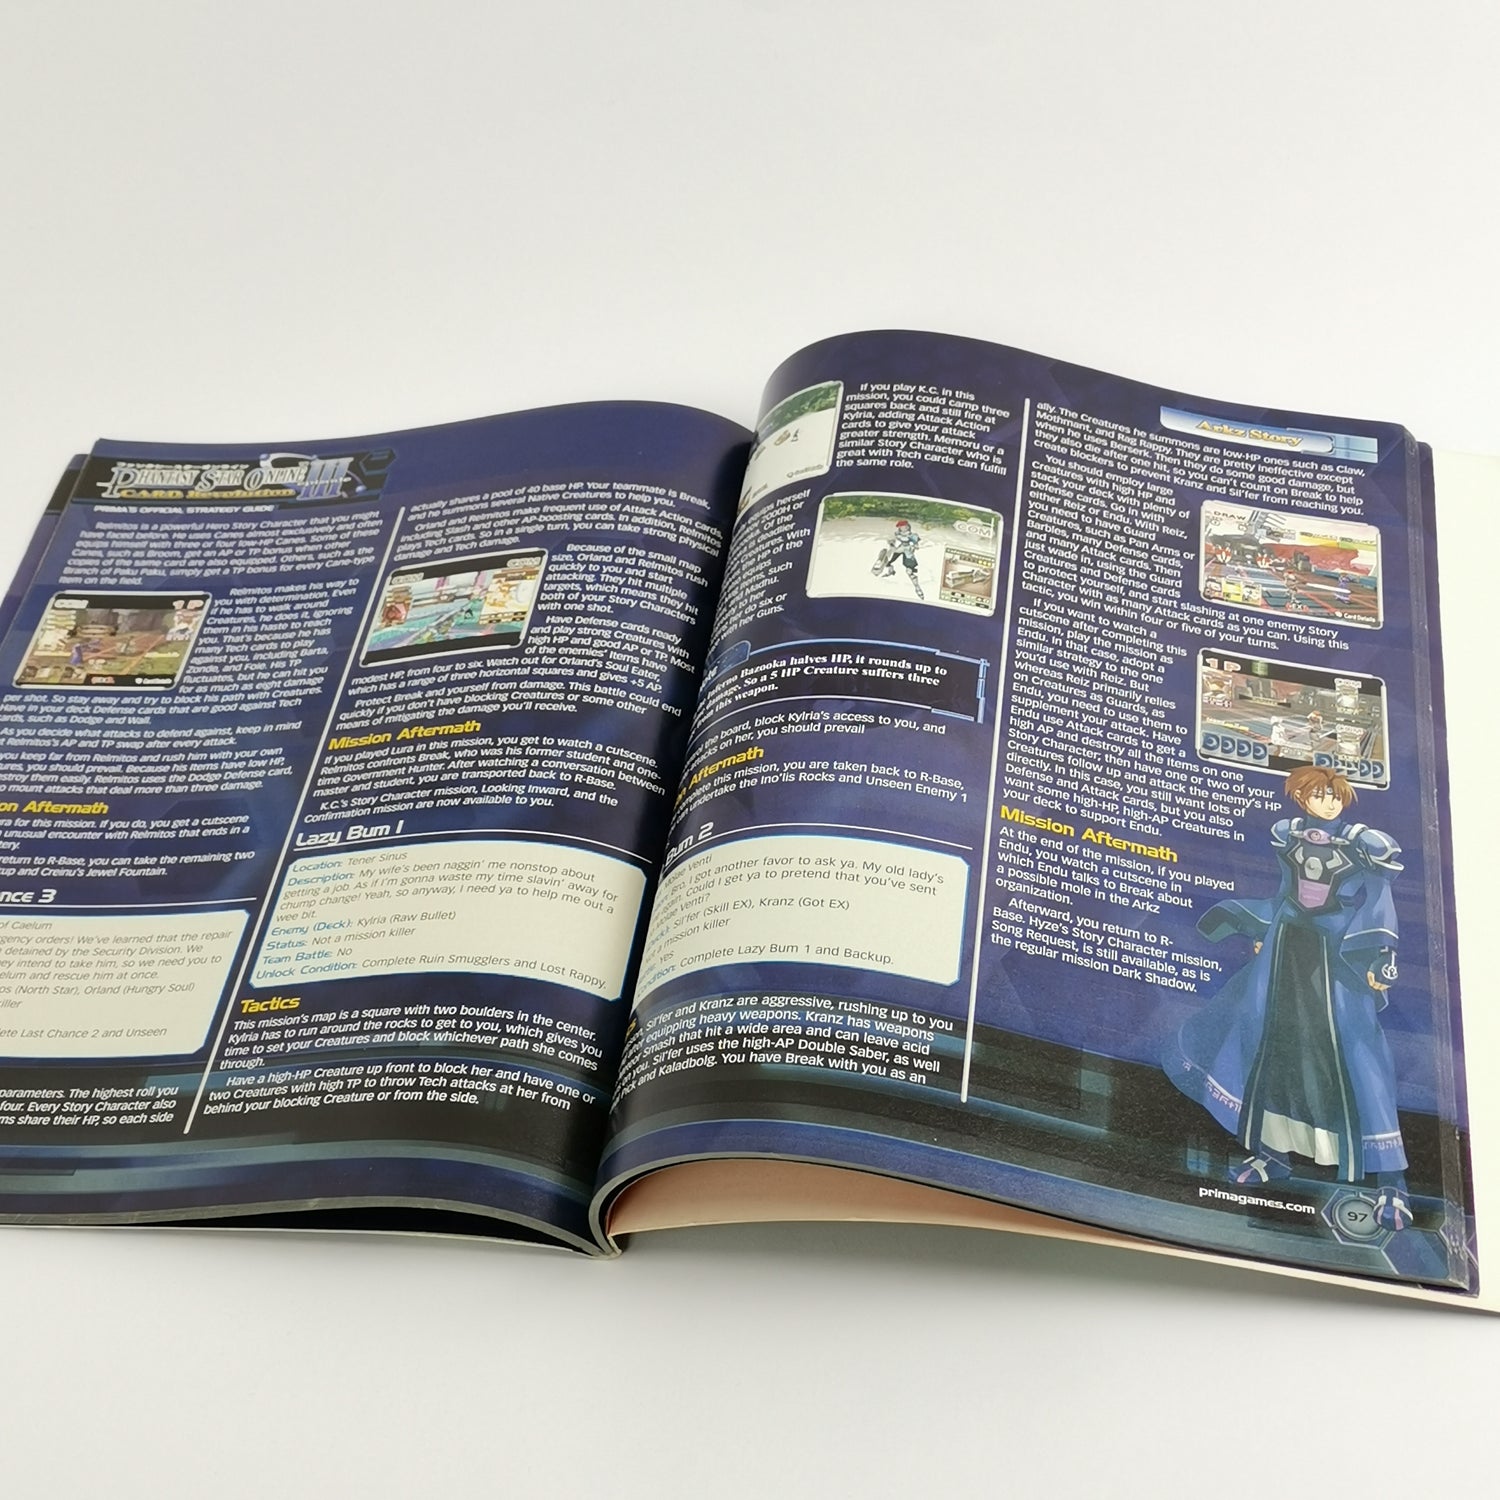 Prima´s Official Strategy Guide : Phantasy Star Online Episode III - Gamecube